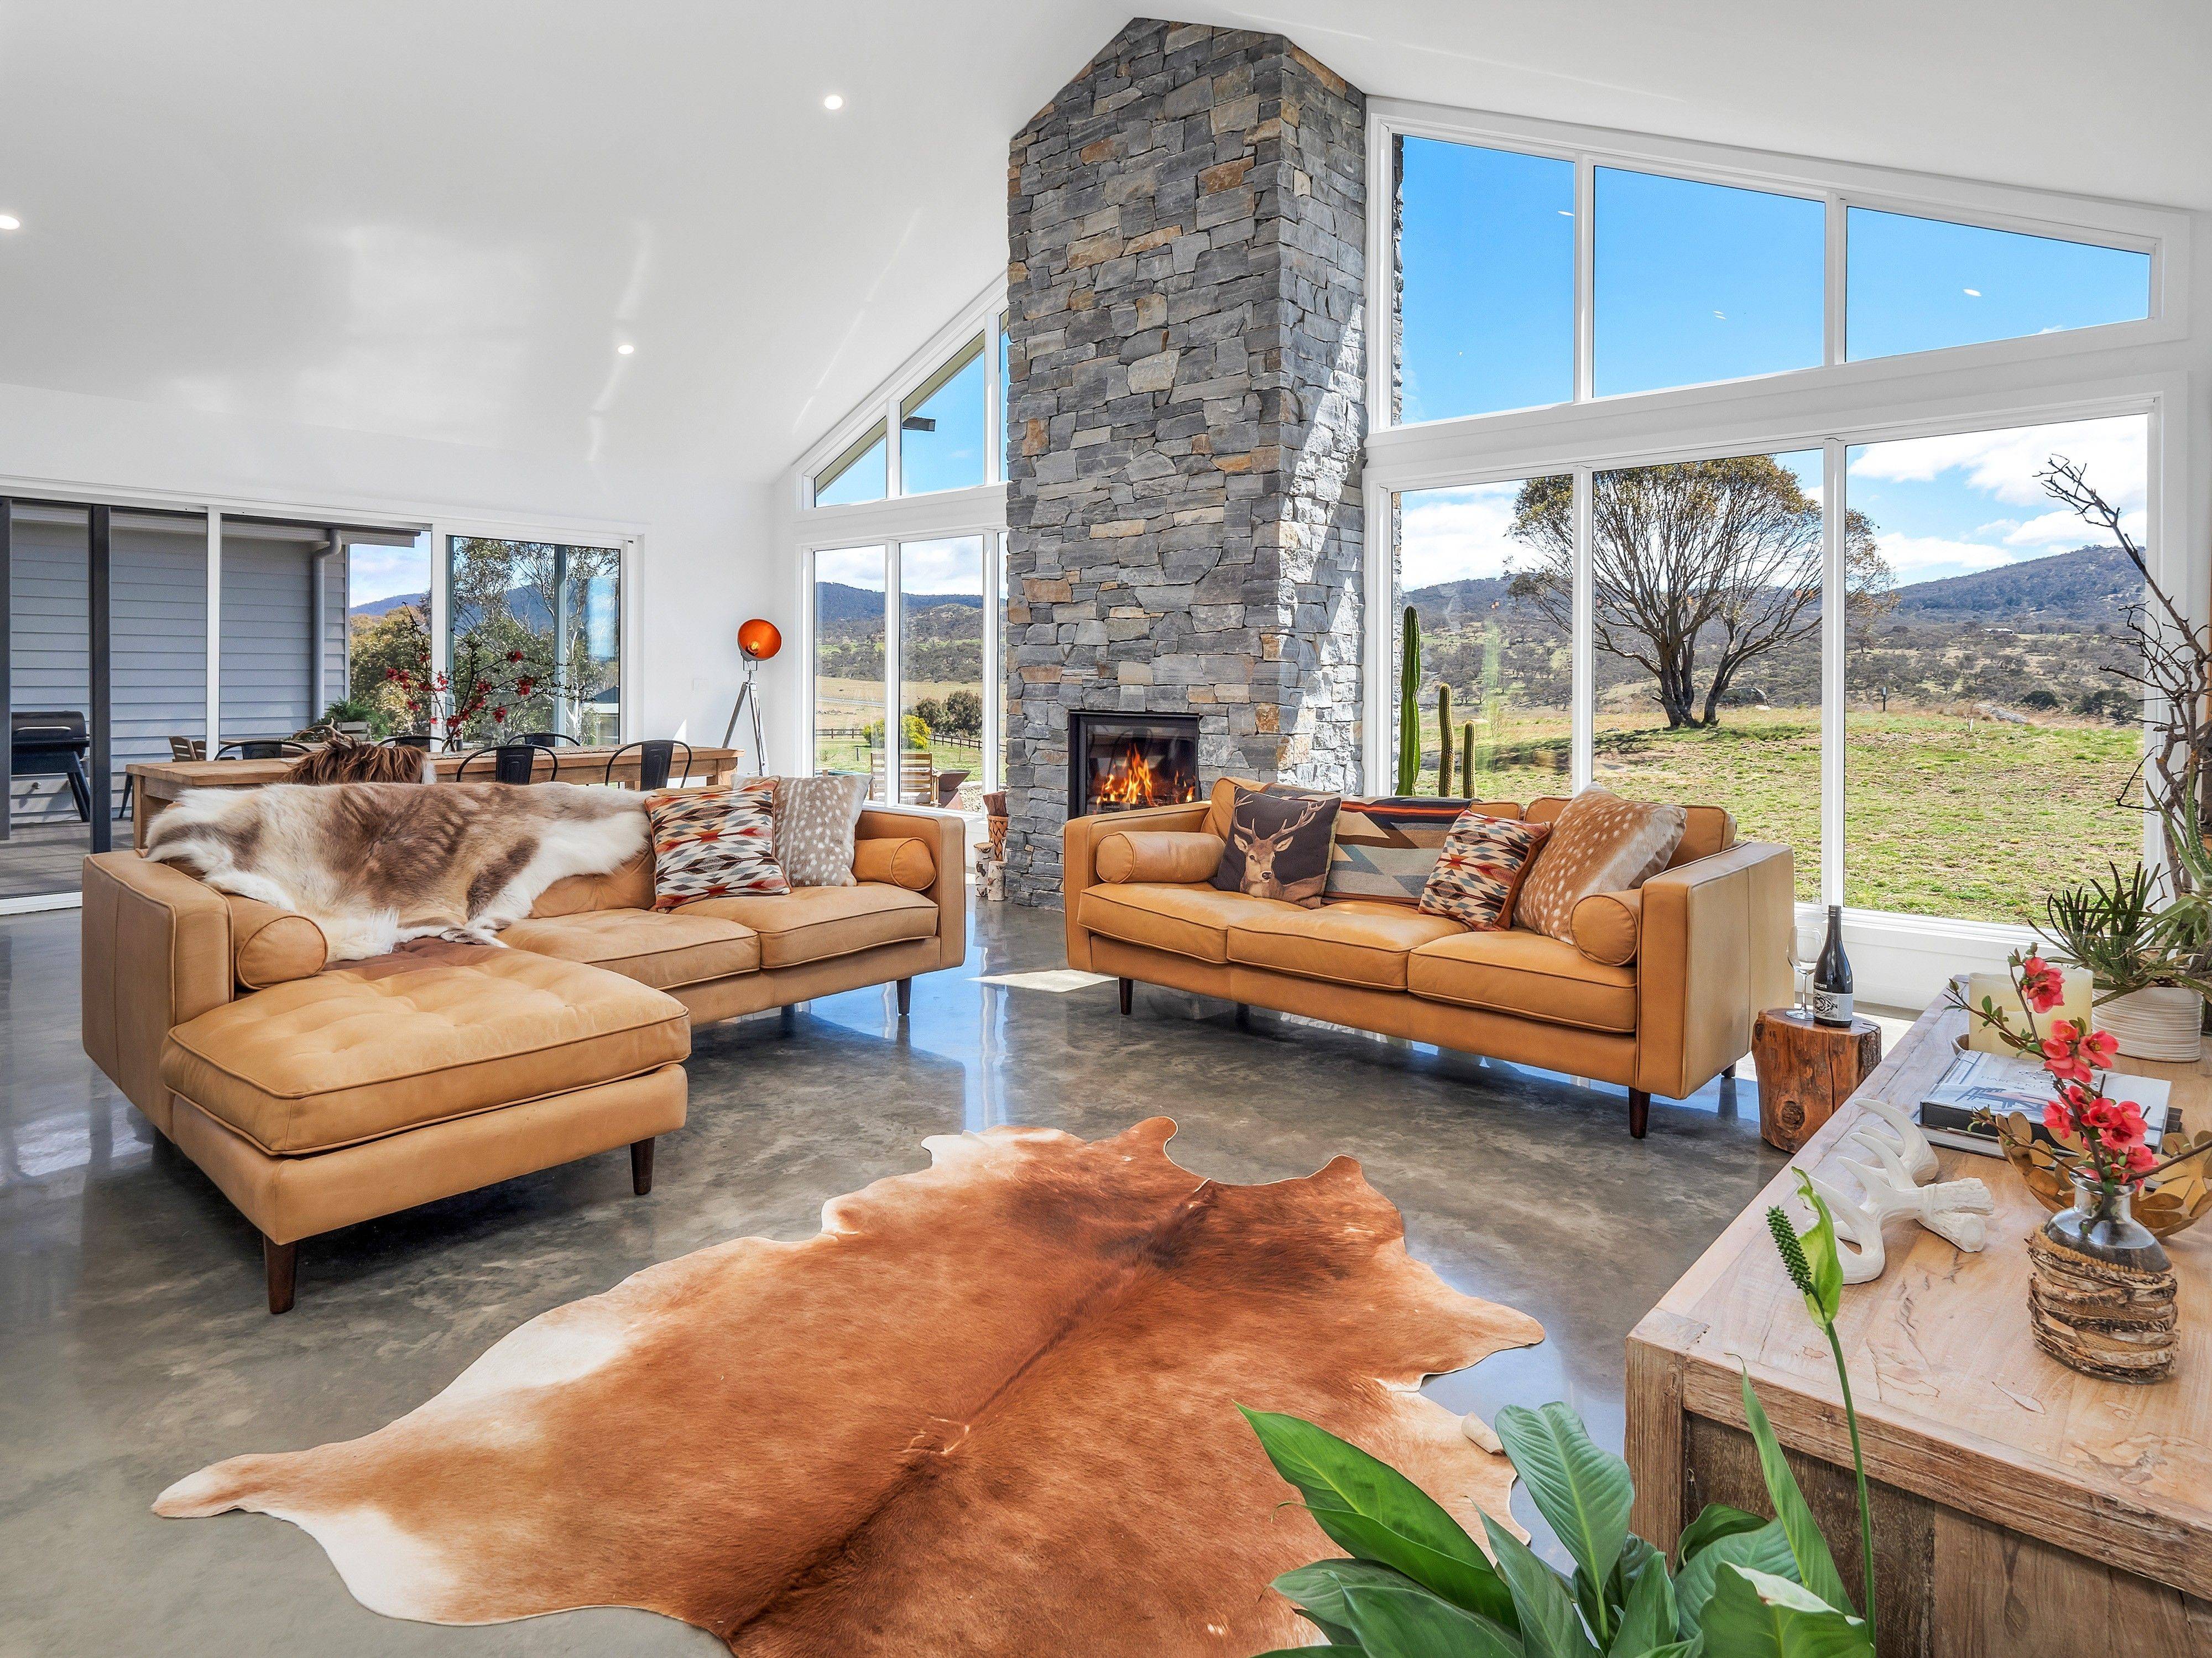 Feel at home in the mountains, with plenty of warmth, light and space